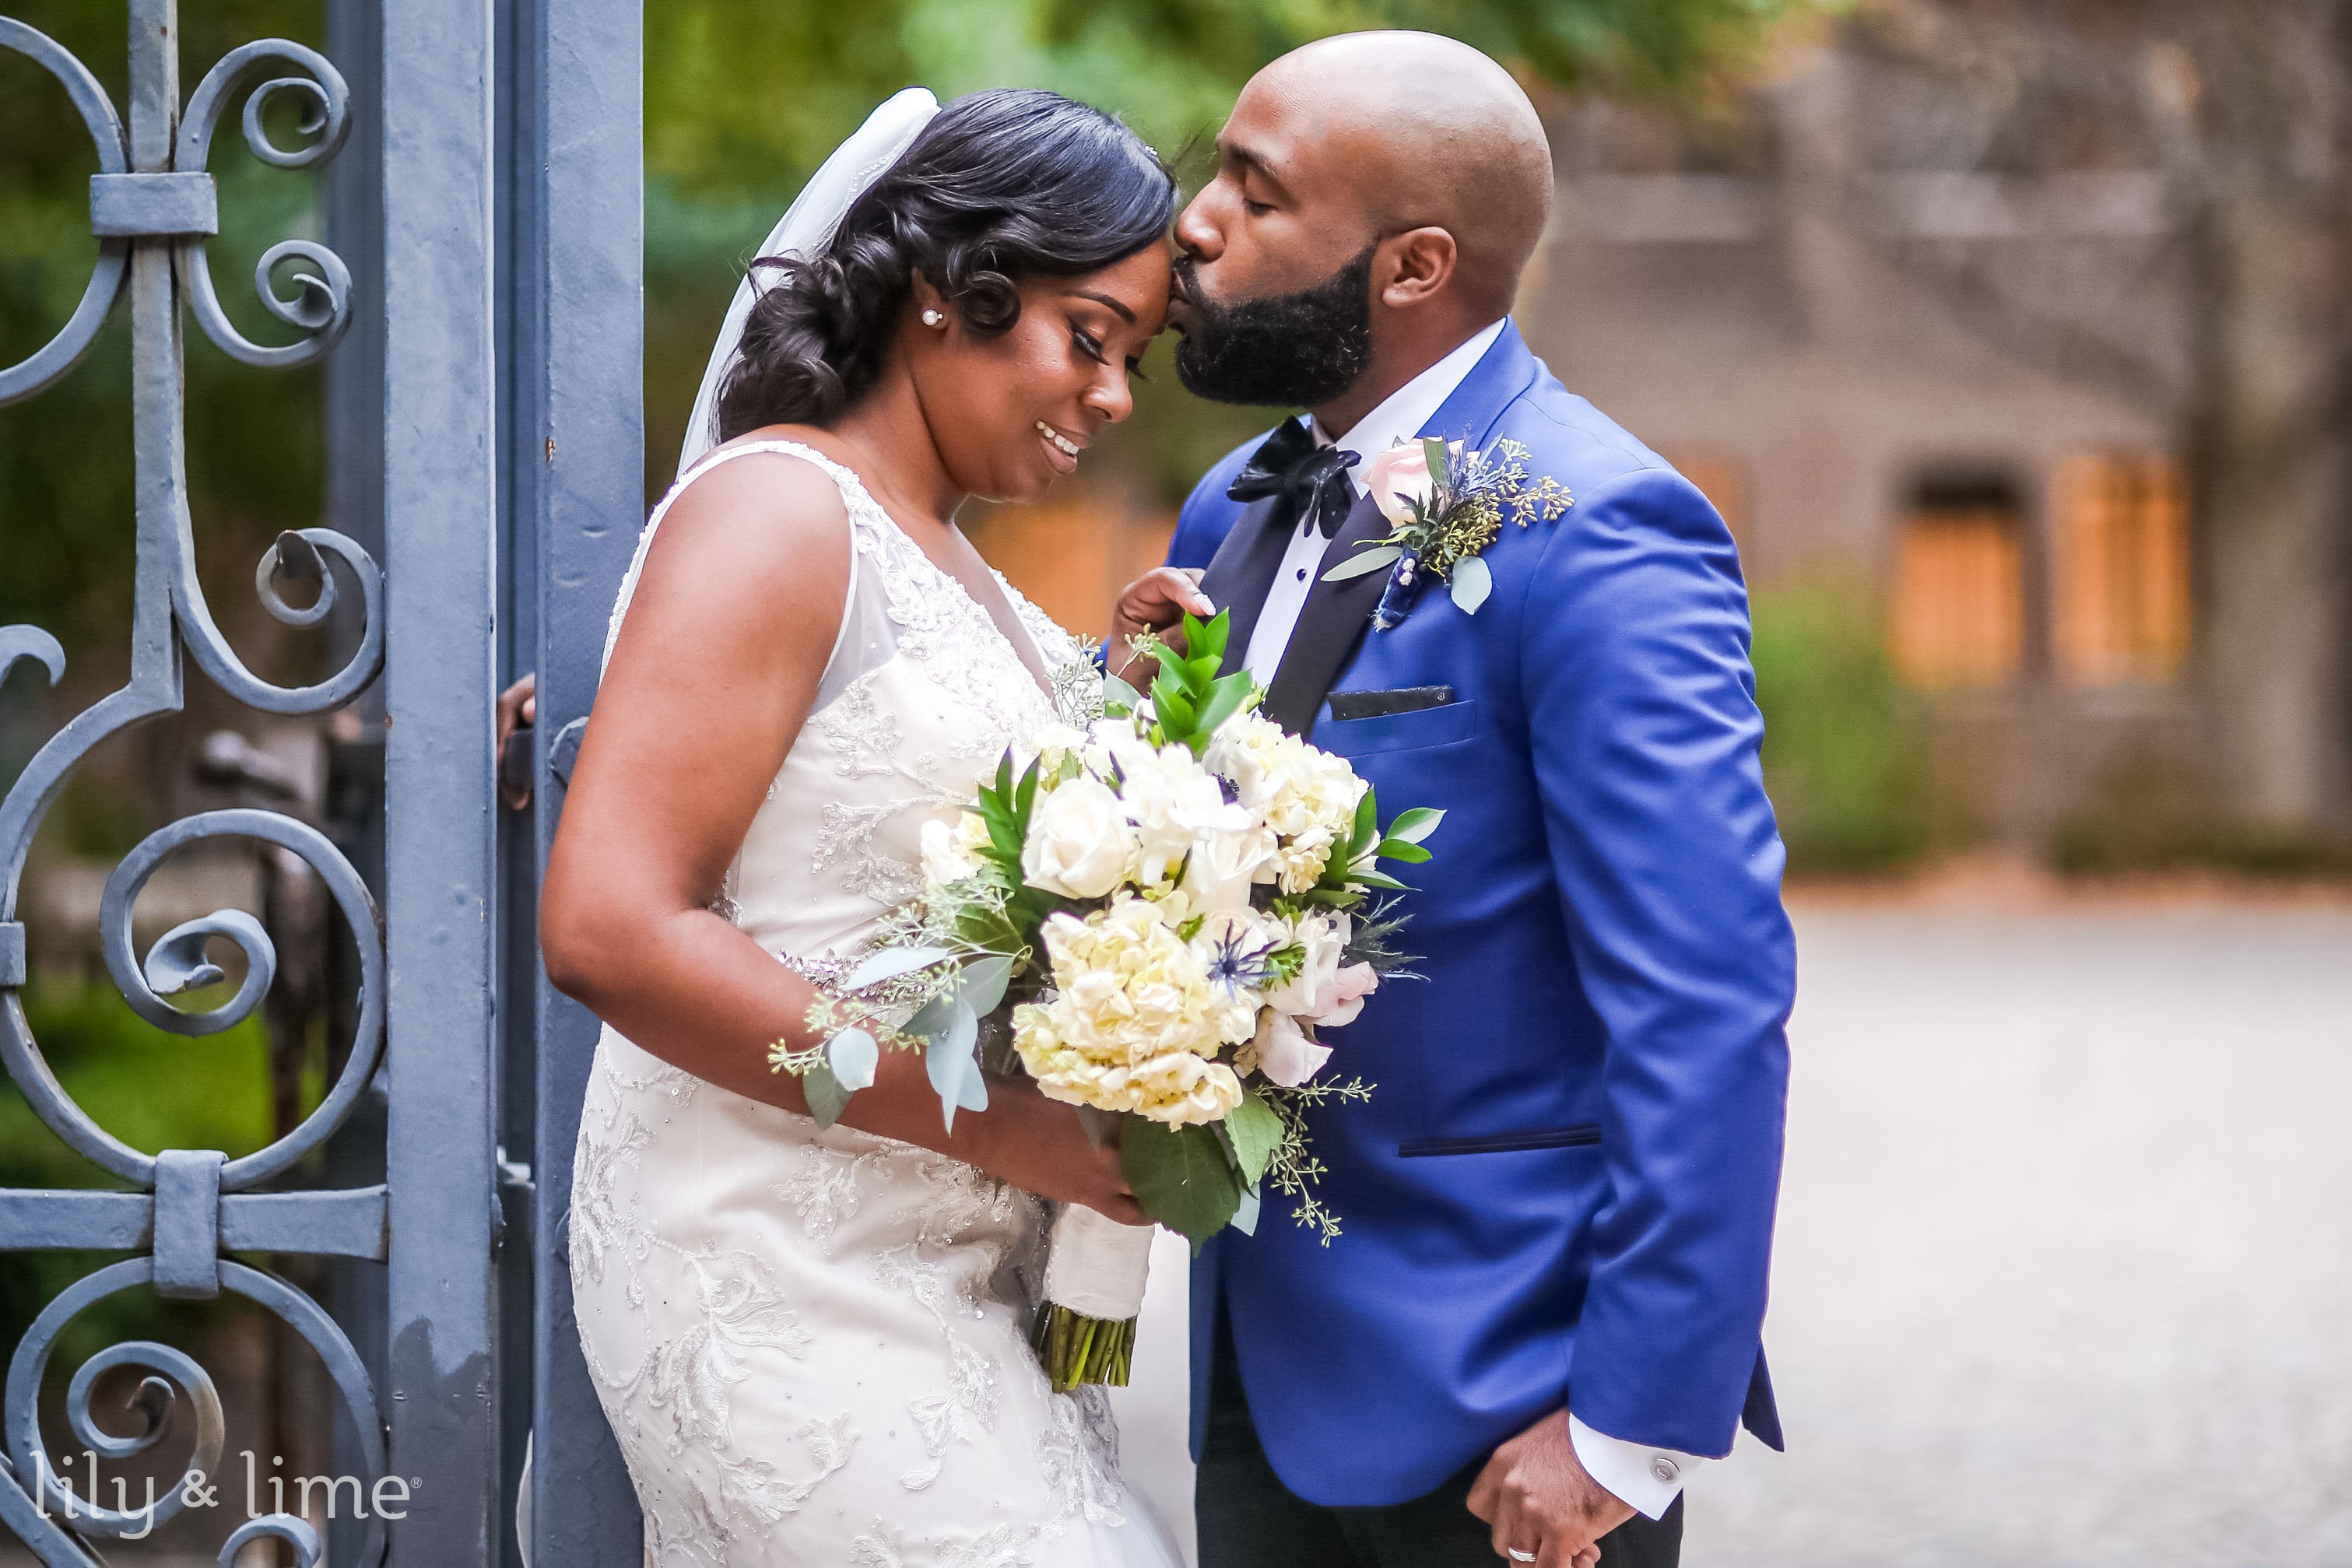 Black American Wedding Traditions To Incorporate Into Your Special